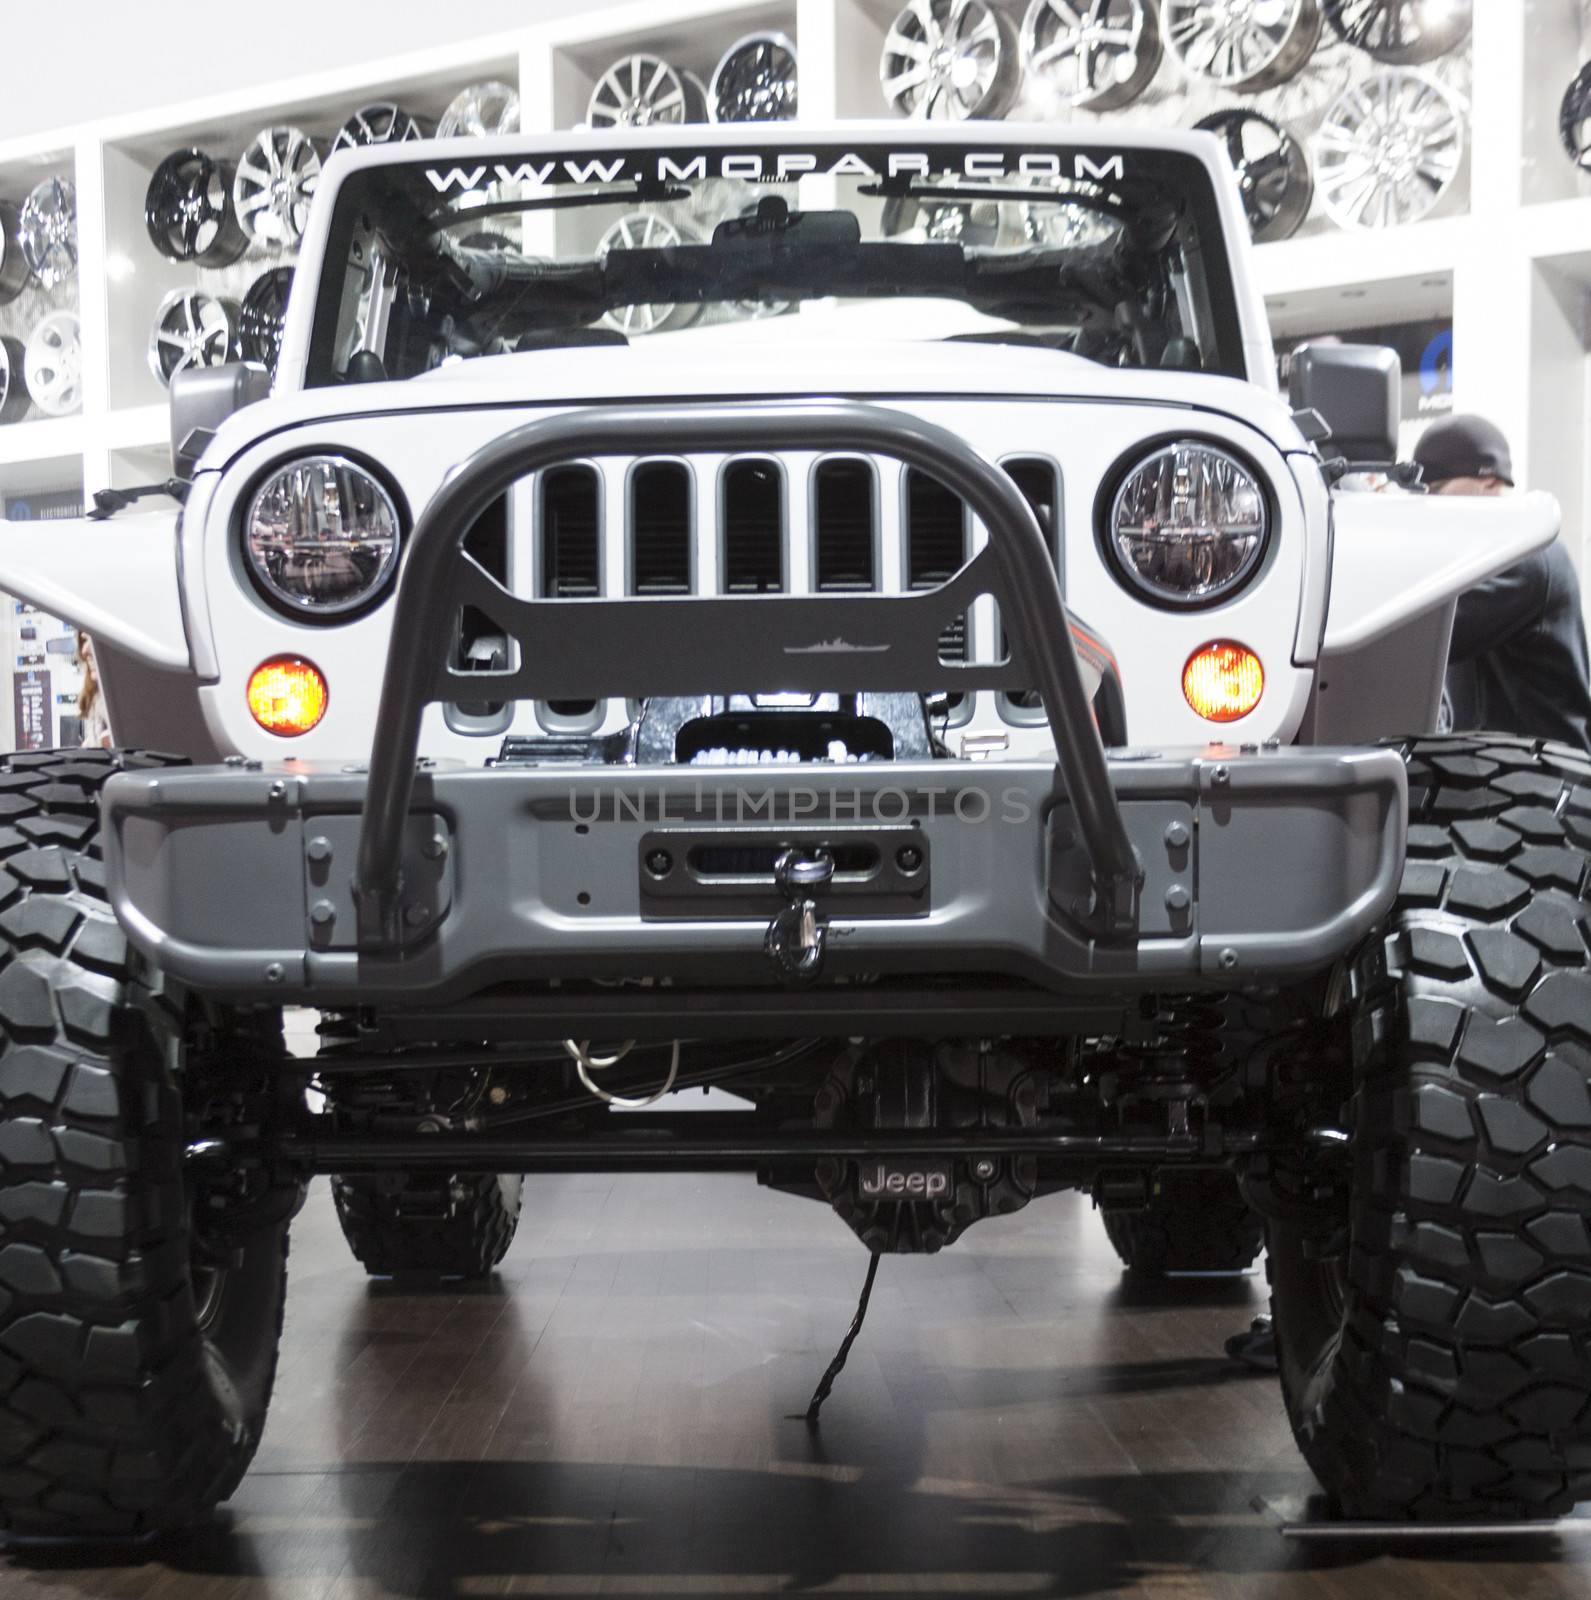 DETROIT - JANUARY 26 :The 2015 Jeep Wrangler at The North American International Auto Show January 26, 2014 in Detroit, Michigan.